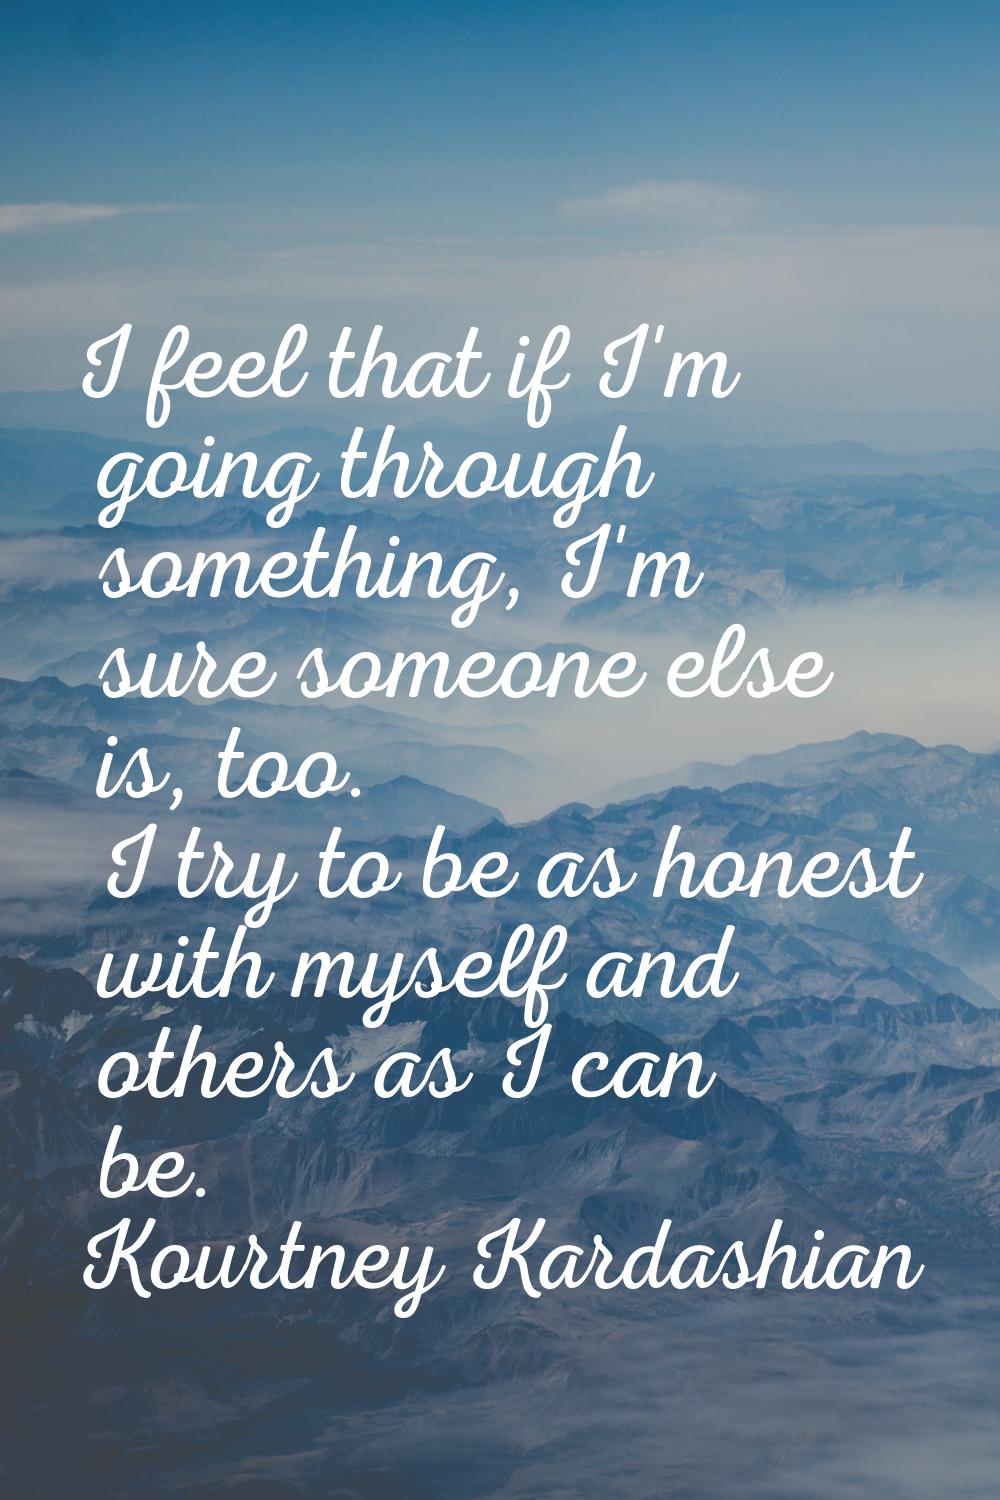 I feel that if I'm going through something, I'm sure someone else is, too. I try to be as honest wi